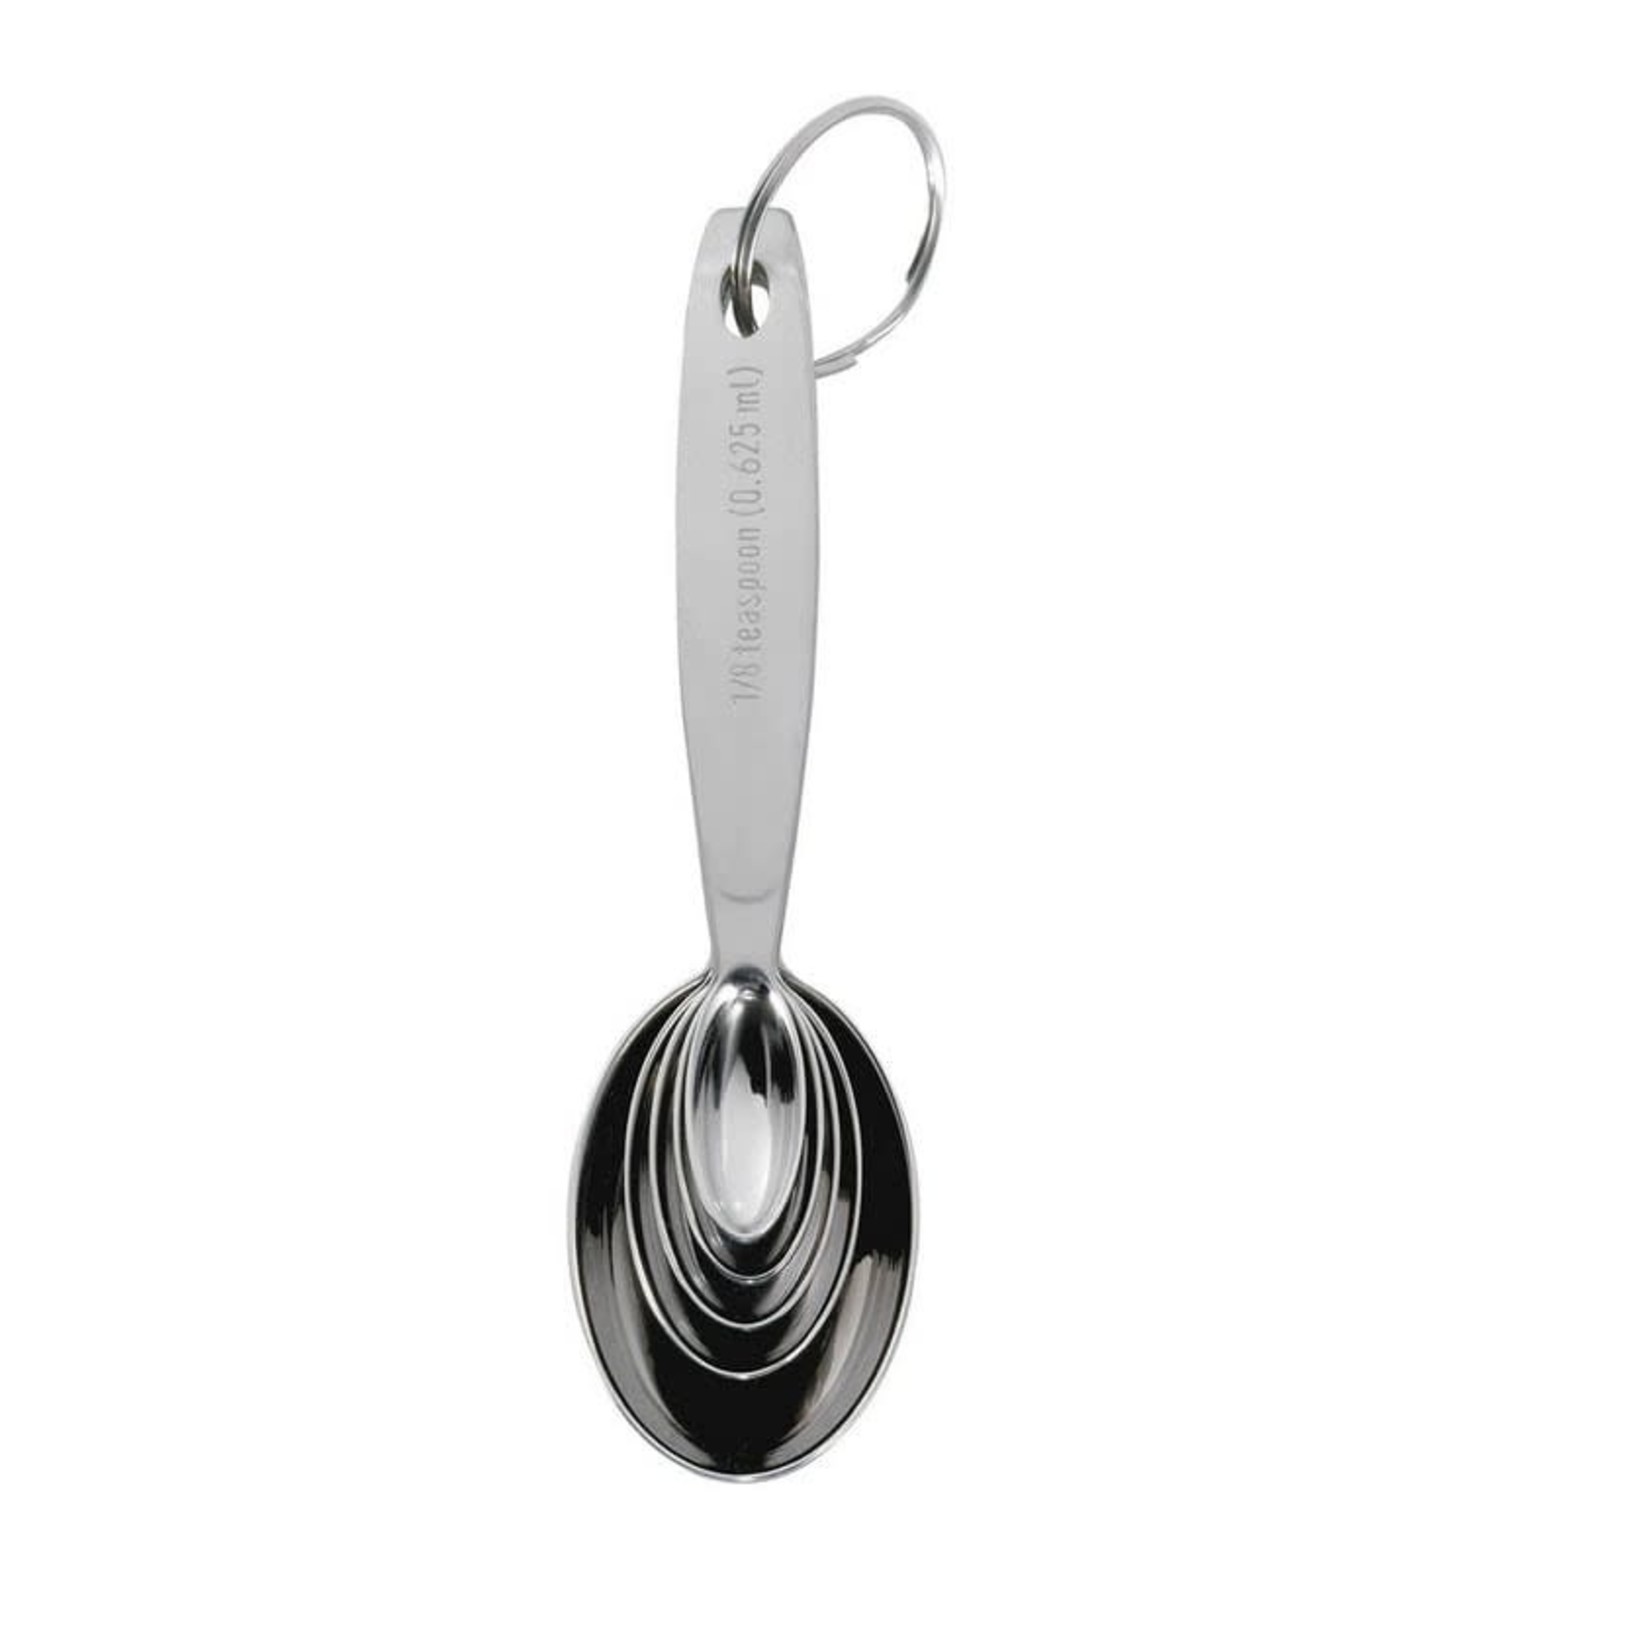 CUISIPRO CUISIPRO Stainless Measuring Spoon Set